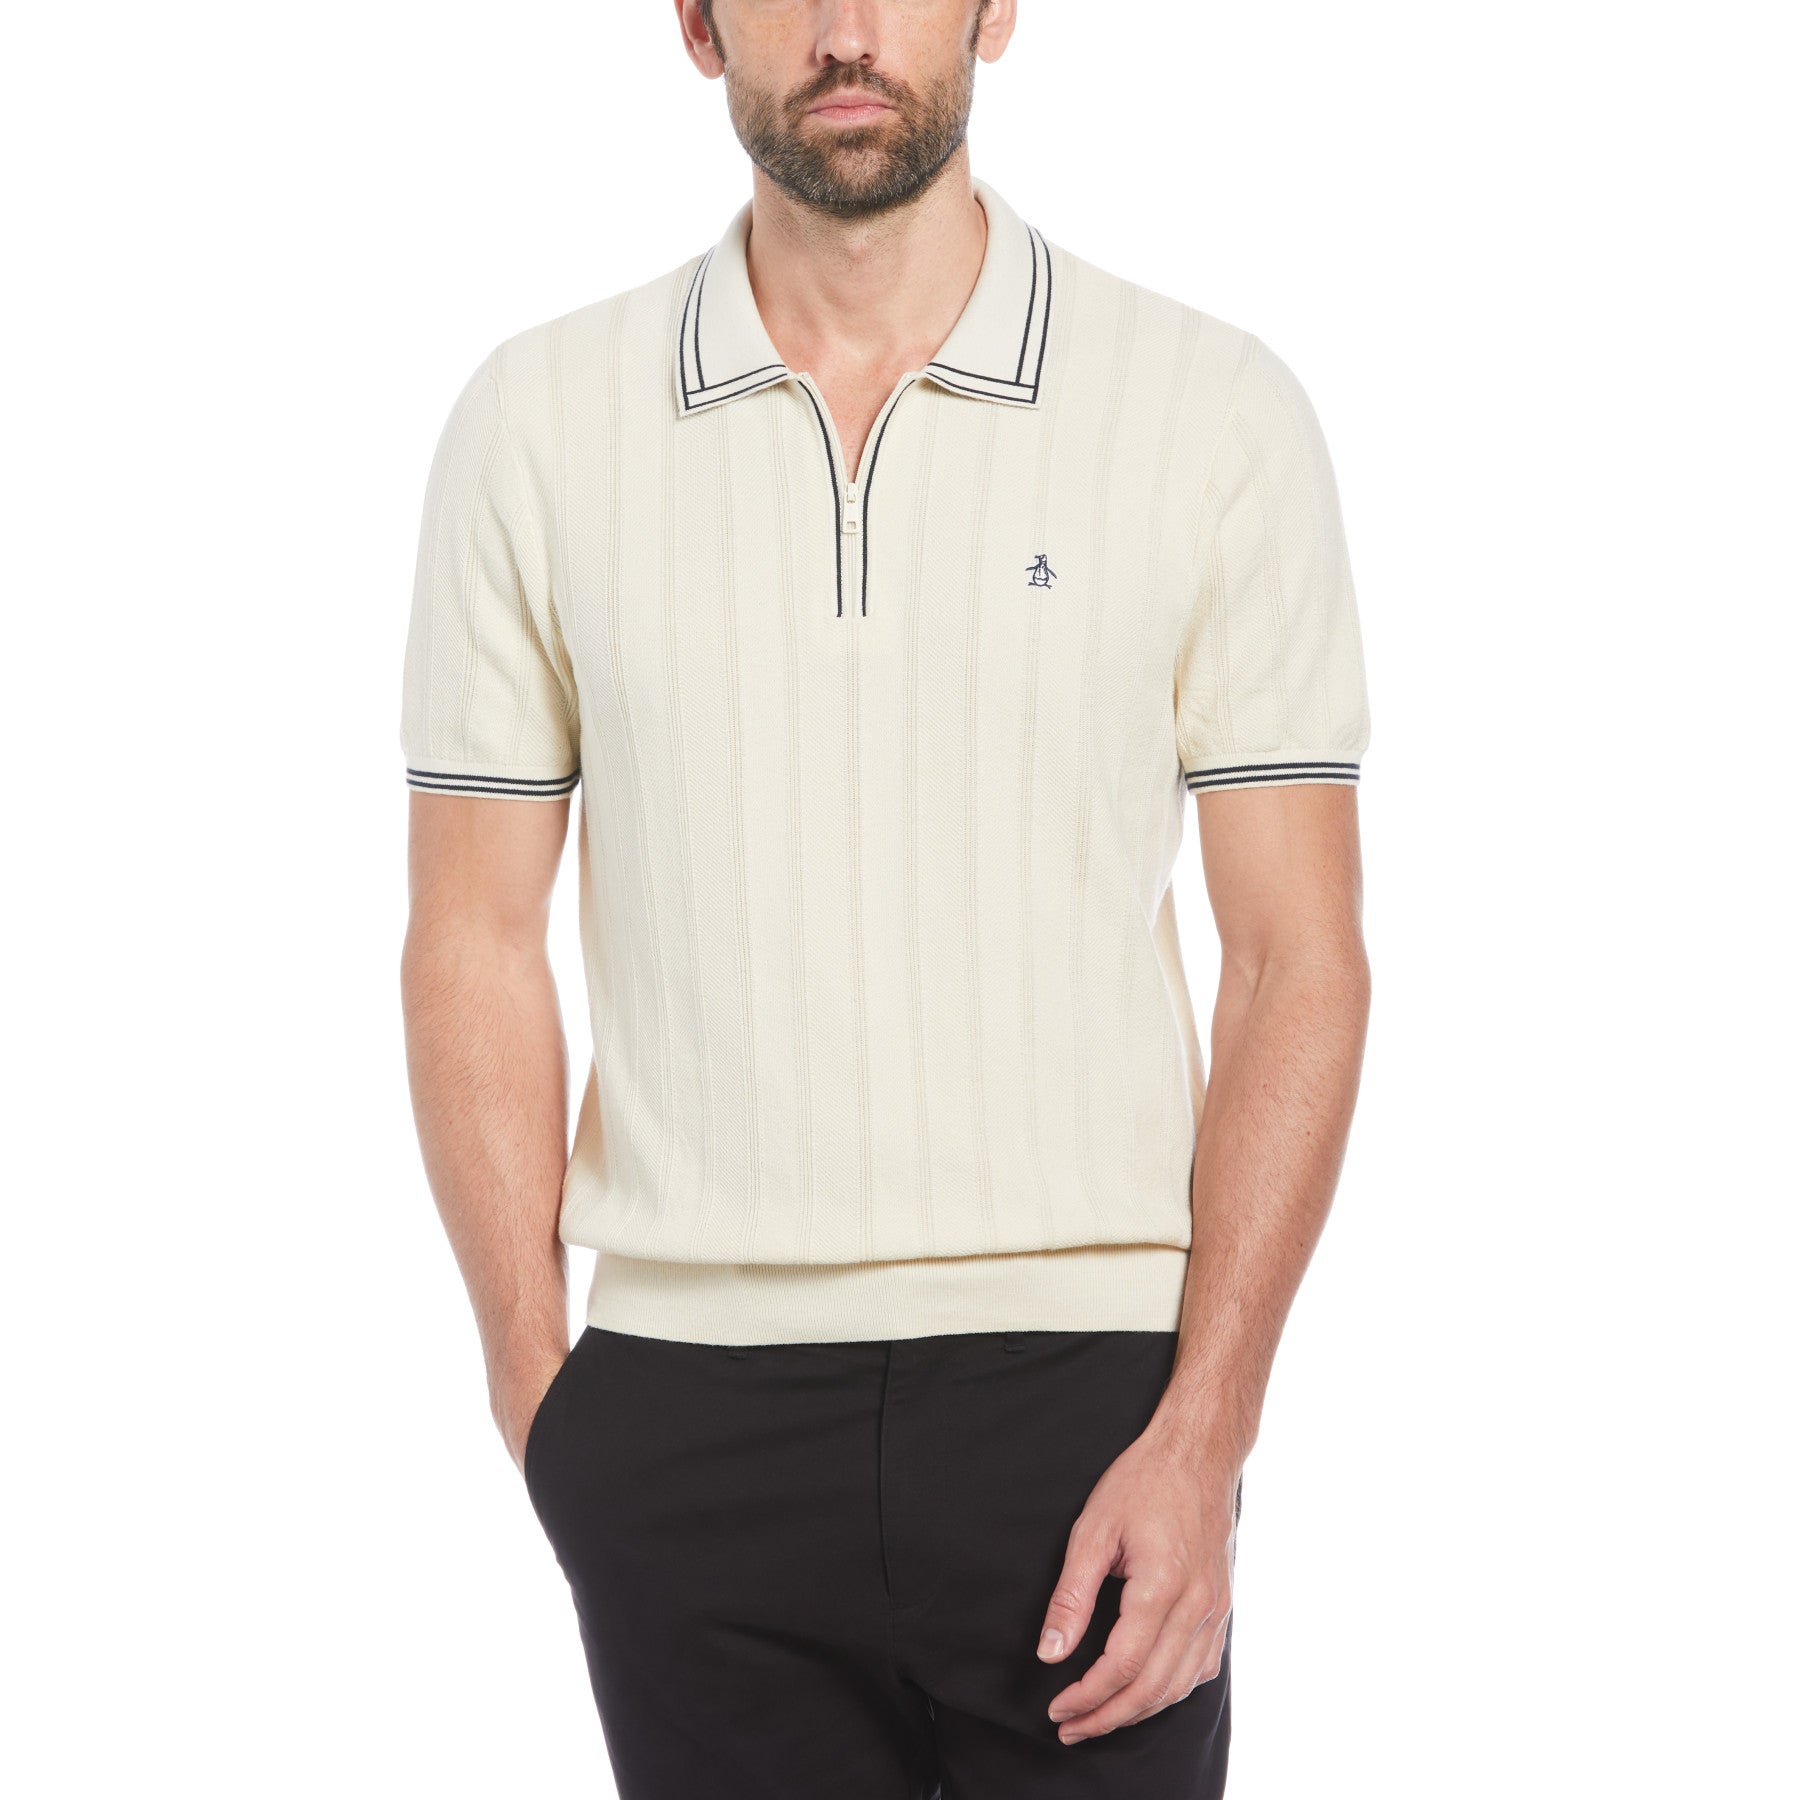 View CashmereLike Cotton Tipped Short Sleeve Polo Shirt Sweater In Birch information